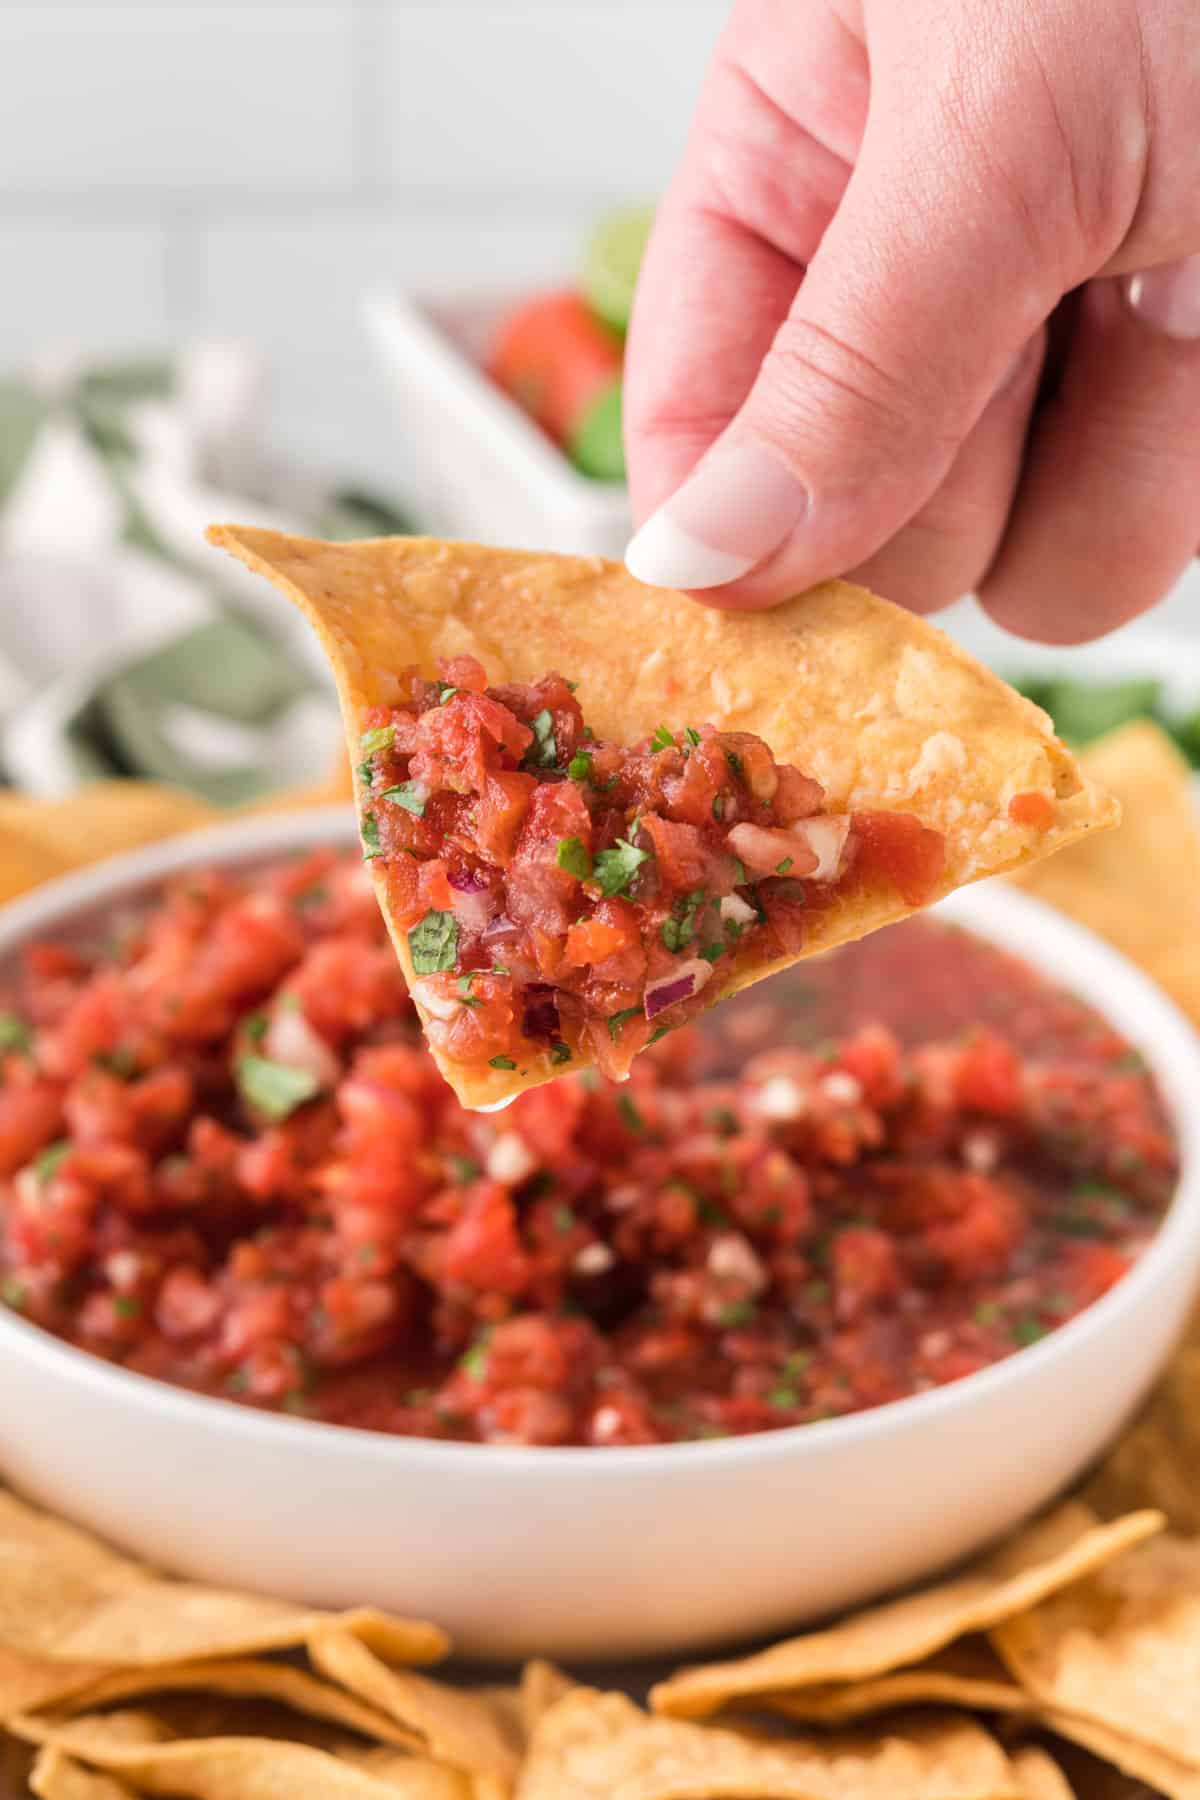 hand holding a chip with salsa